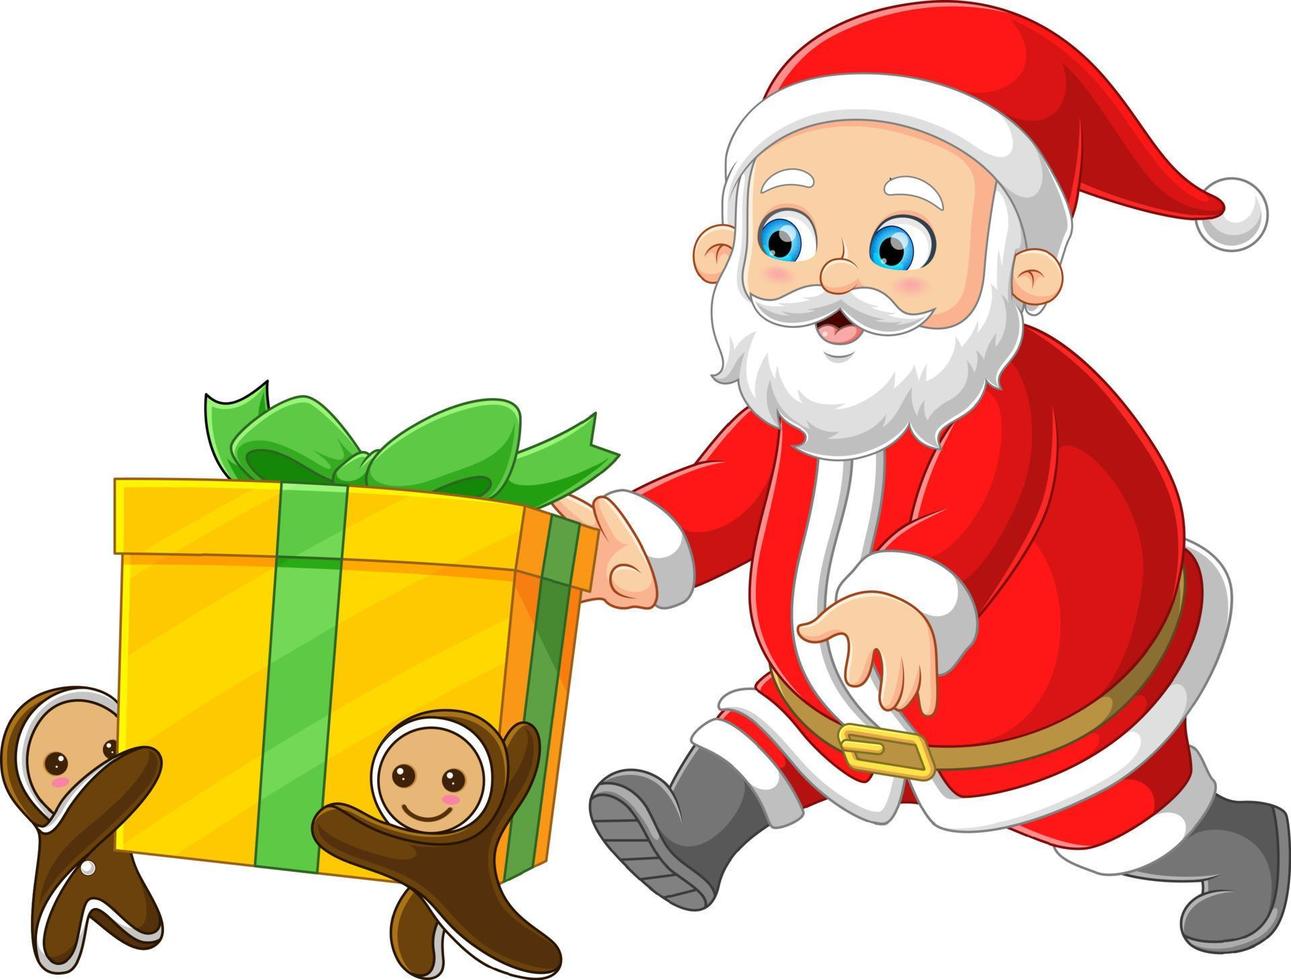 The Santa claus is running to catch a gift that is taken by little ginger cookies vector